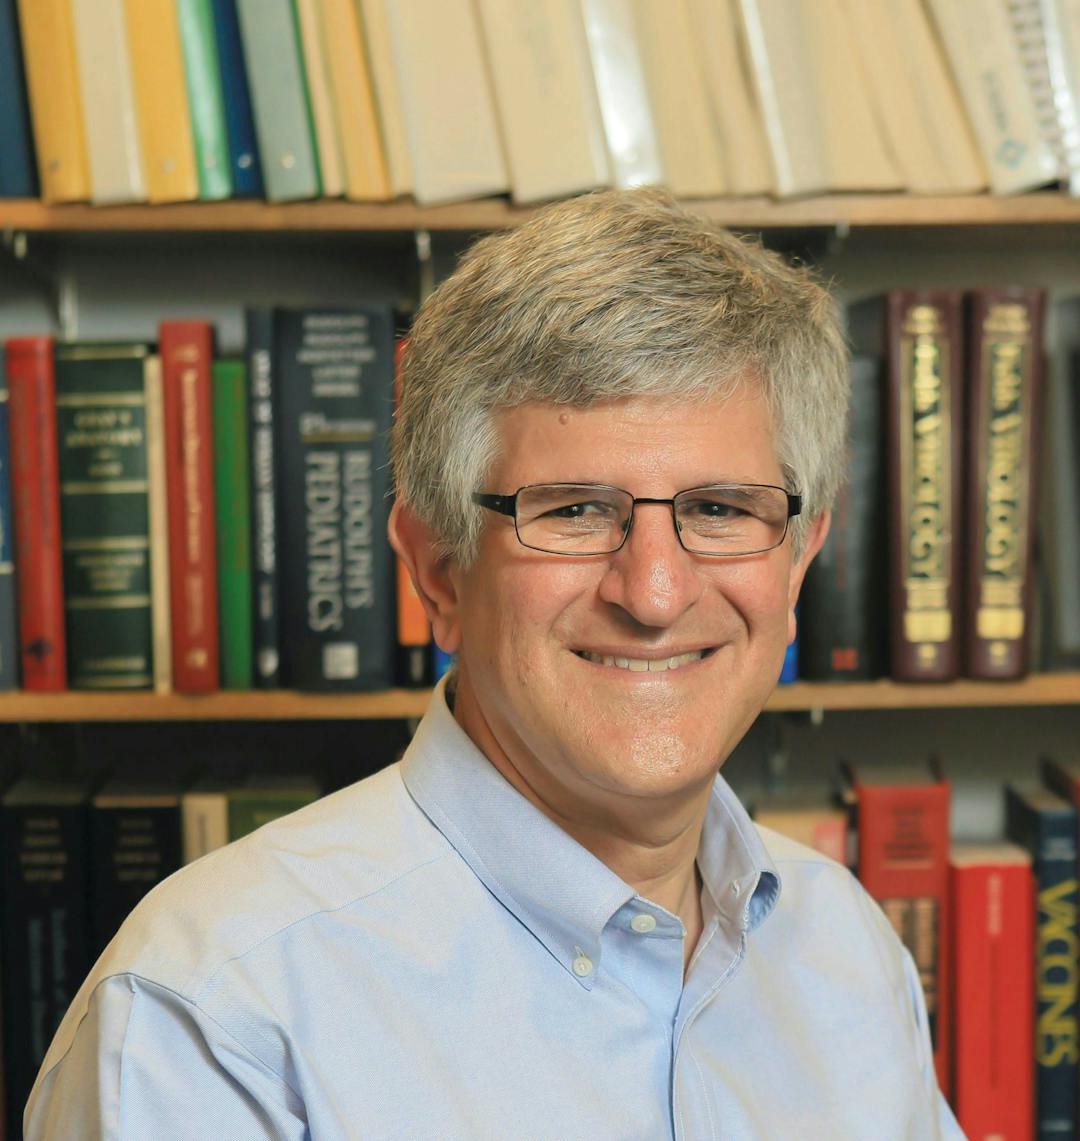 Paul A. Offit, MD, author of Overkill: When Modern Medicine Goes Too Far
